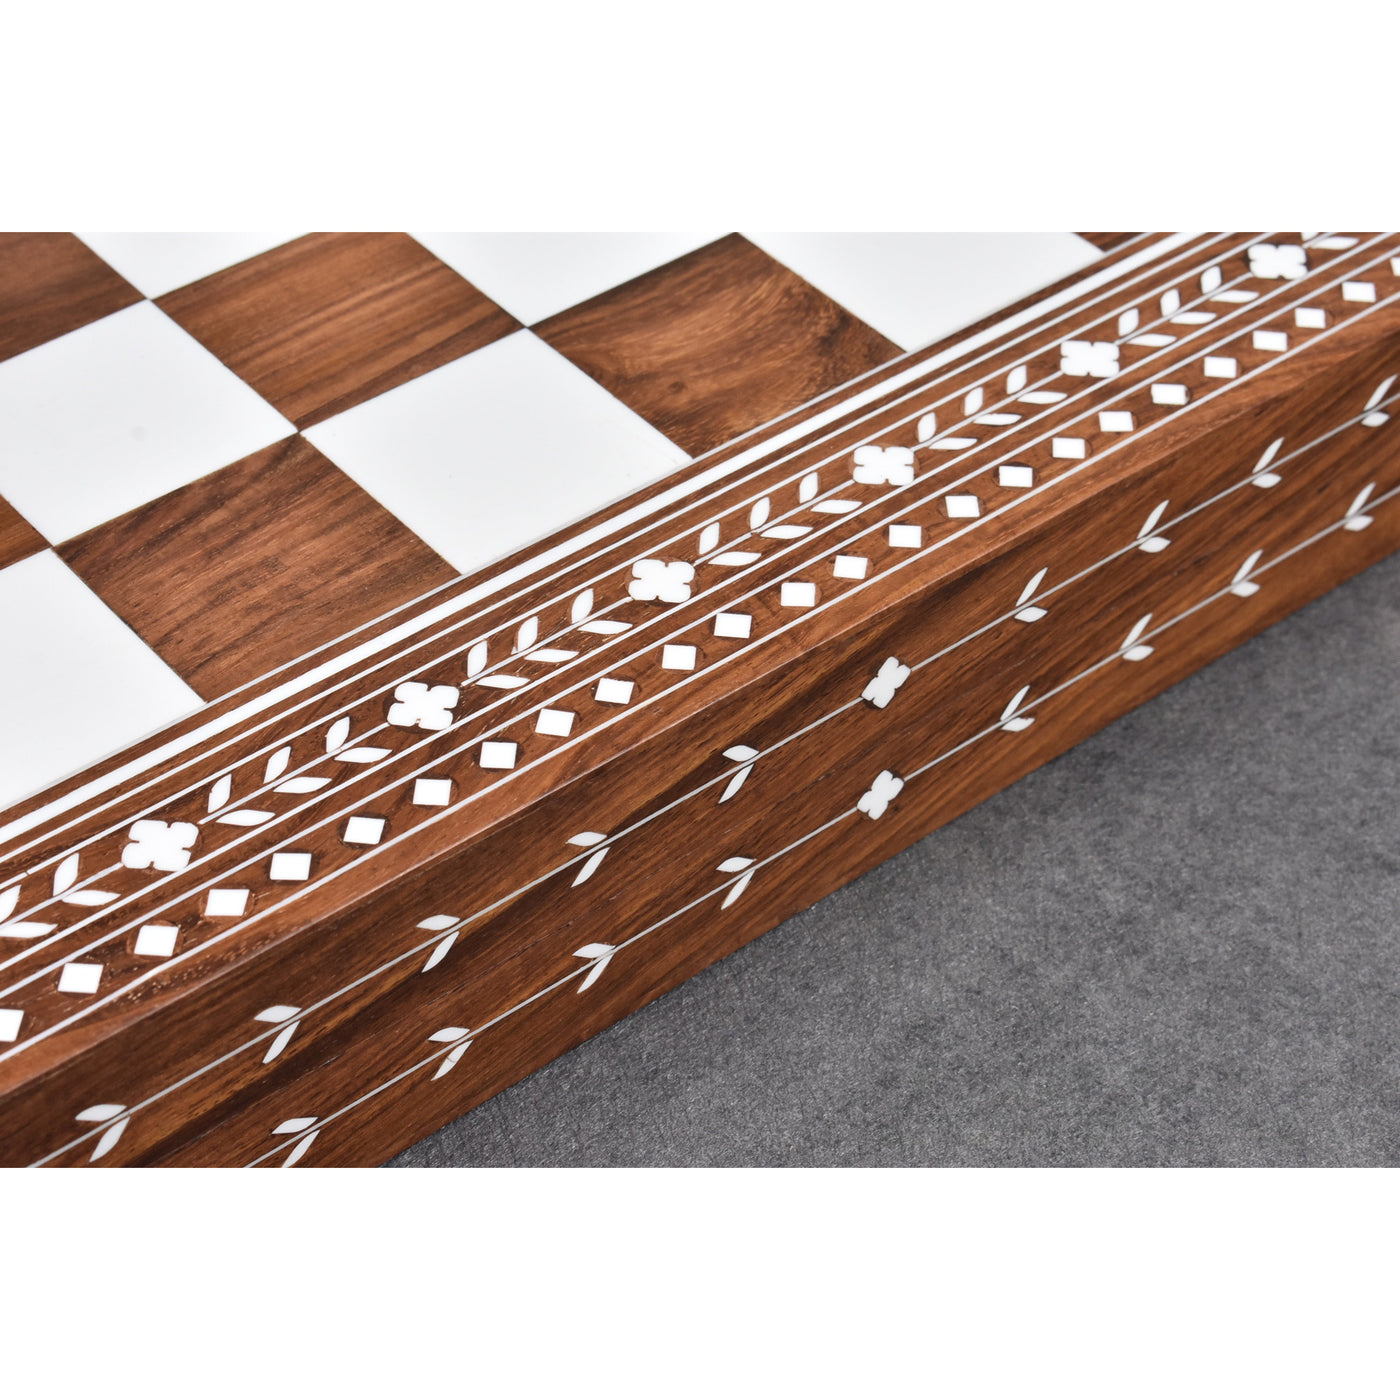 Buy Solid Sheesham & Acrylic Ivory Inlaid Wooden Folding Chess board online